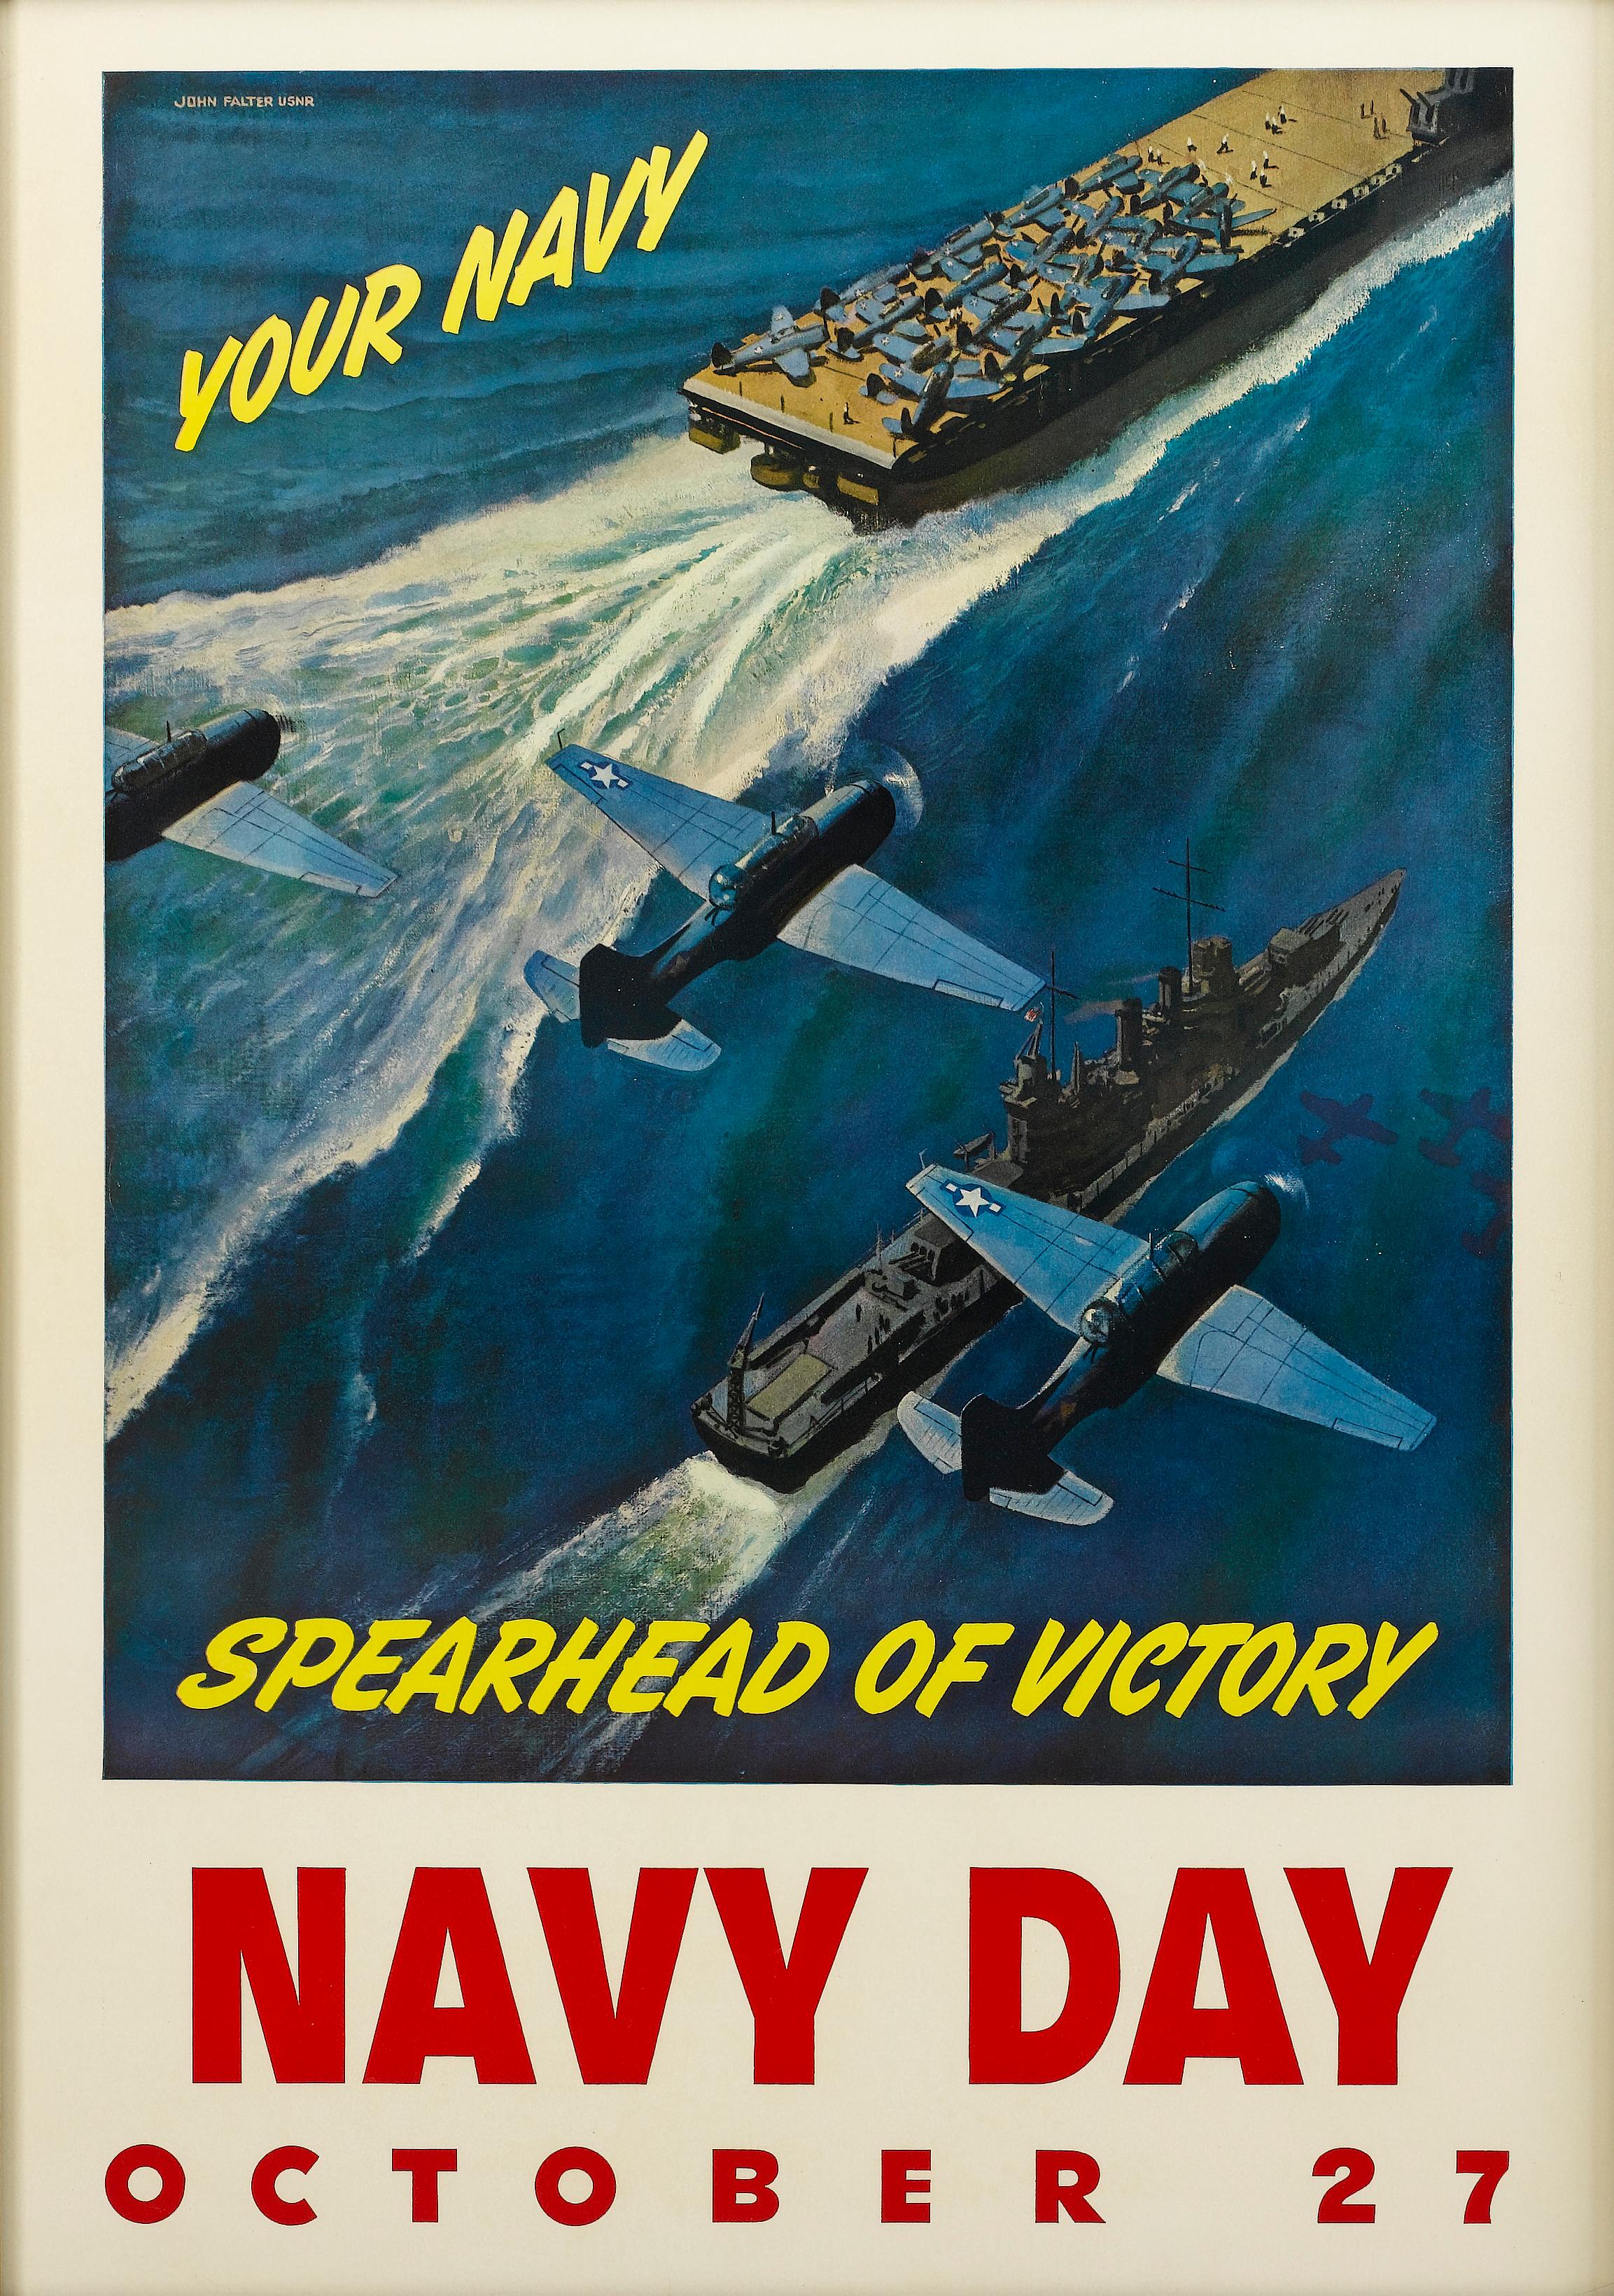 This is an original WWII chromolithographic poster, designed for the Navy. The poster is by John Philip Falter and was published in 1940s by the Office of War Information.

The poster features a dynamic and artful illustration of three Navy Avenger